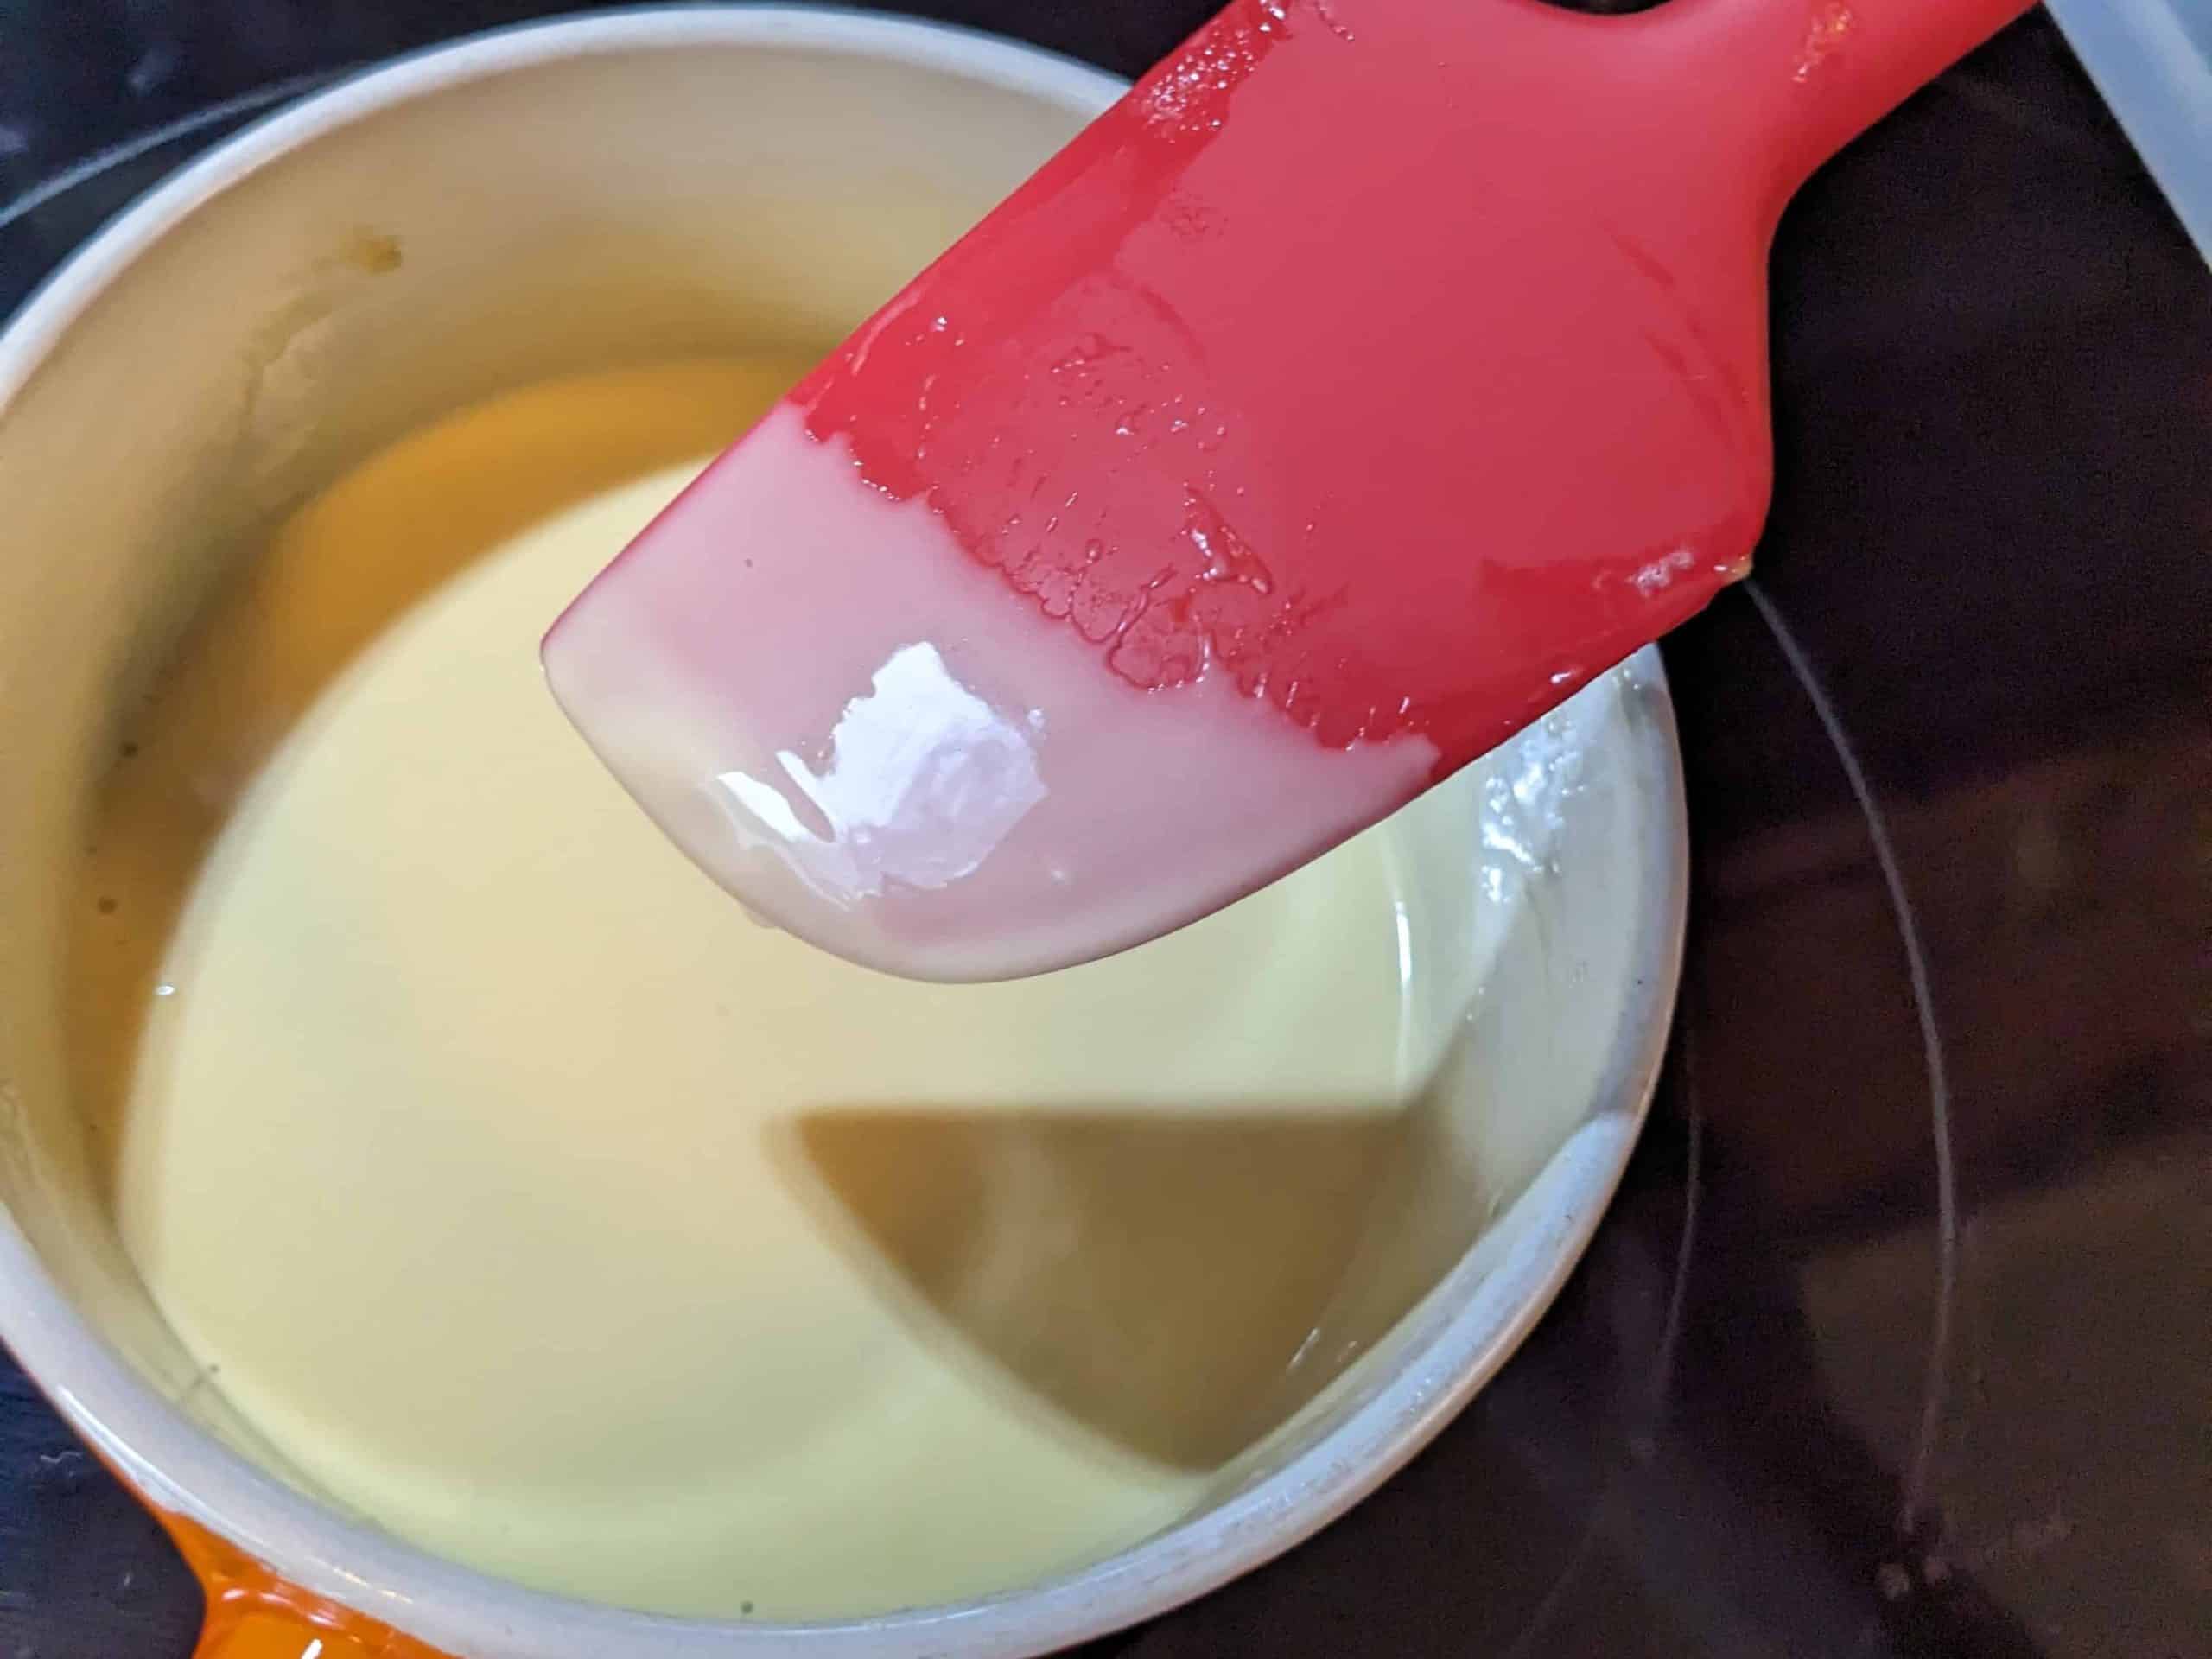 Testing the thickness of the keto vanilla pudding with a silicone spatula